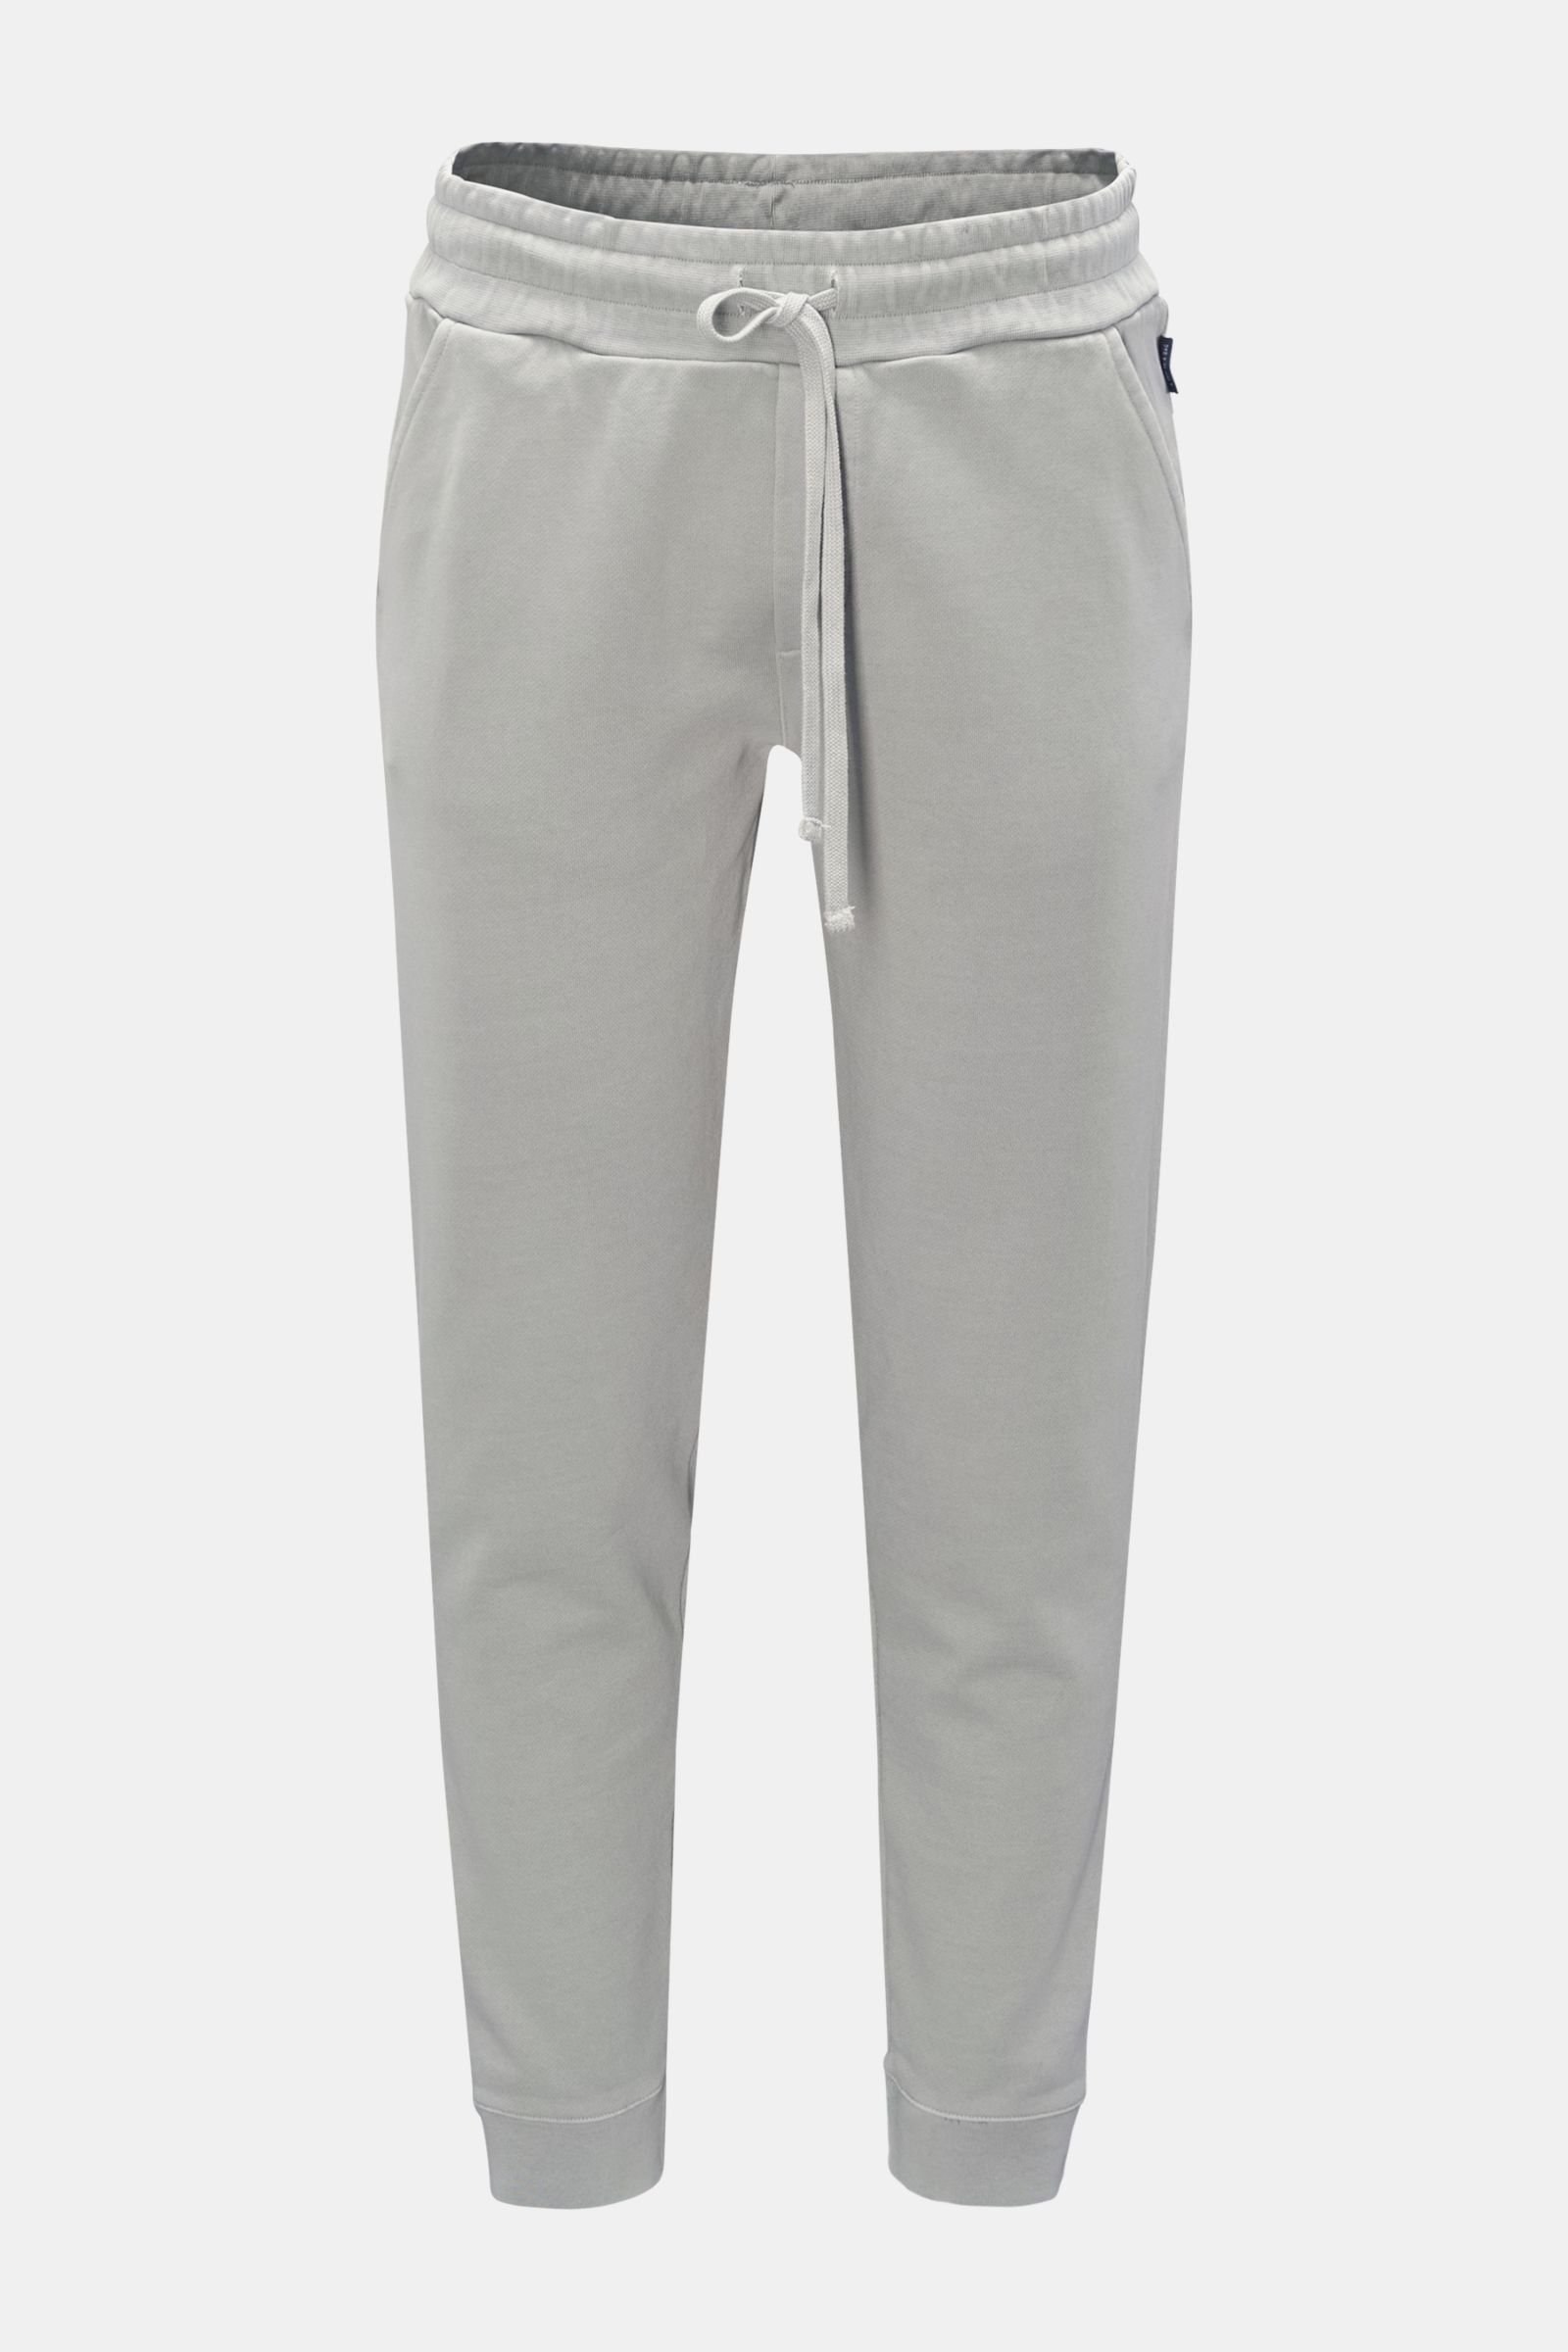 04651/ A TRIP IN A BAG cashmere jogger pants 'The cashmere Pant' grey